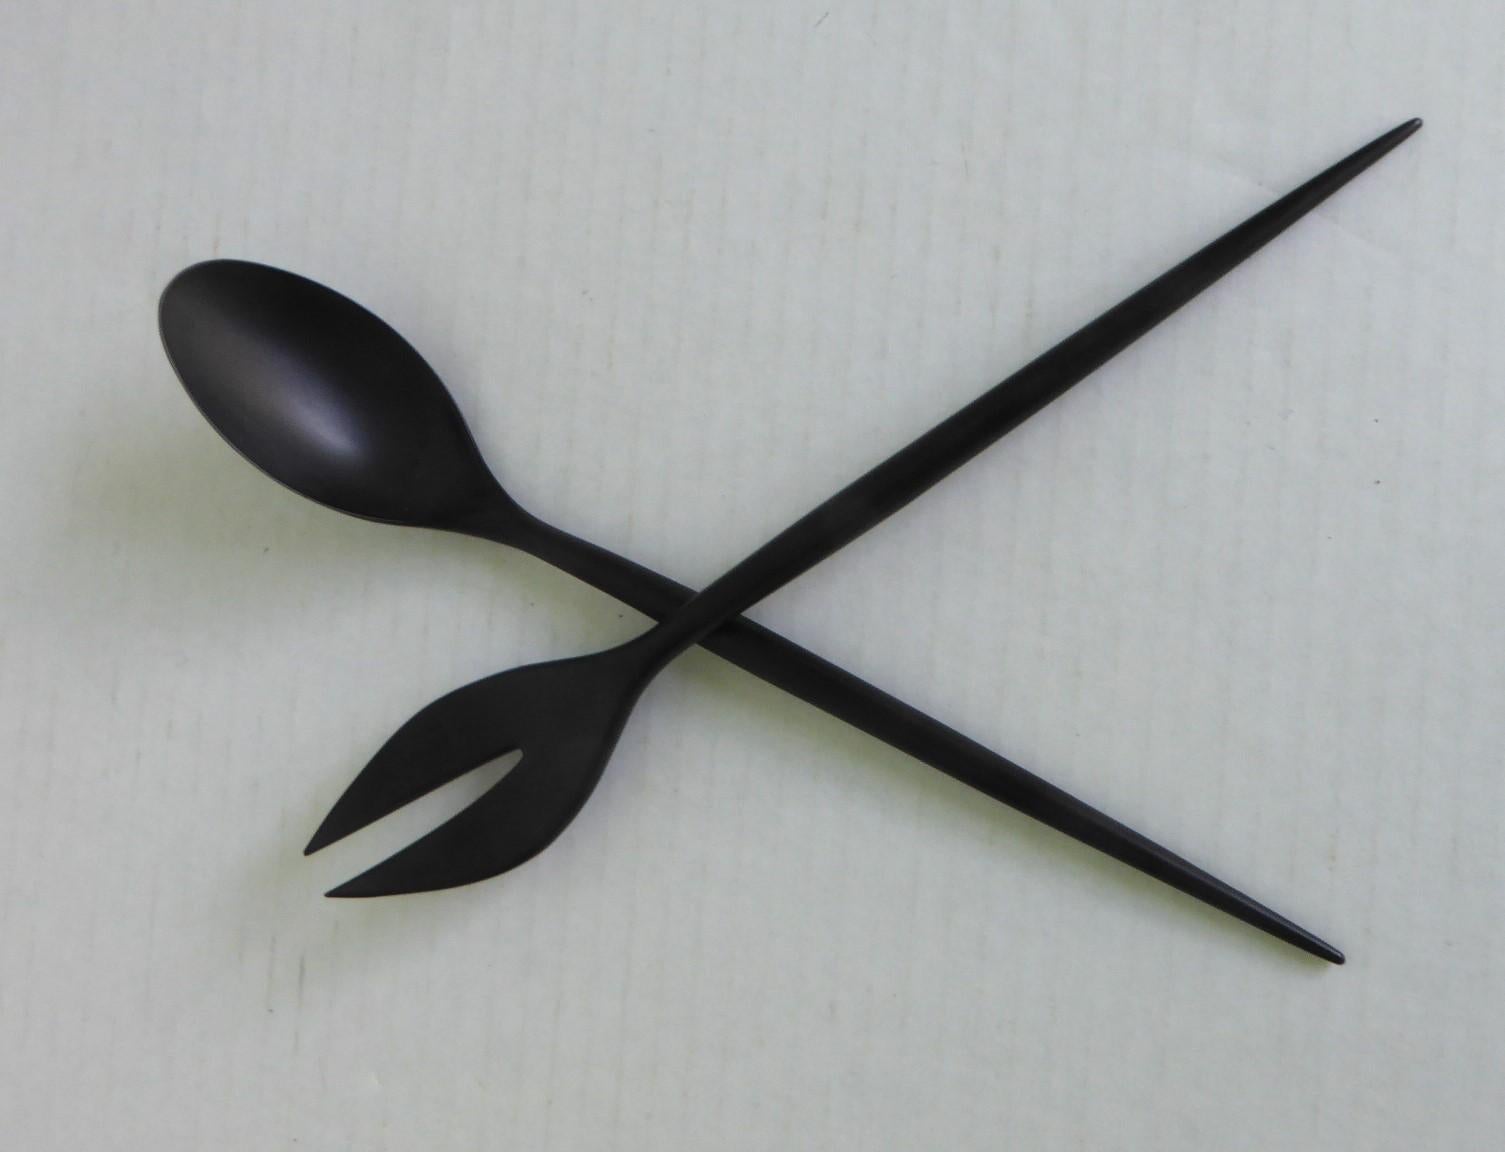 Fantastic set of Danish Mid Century Modern black Melamine salad serving spoon & fork utensils designed by Herbert Krenchel (1922-2014) in Denmark in 1950s.  They were made by Torben Orskov until 1964. The Krenit came in 9 sizes and numerous